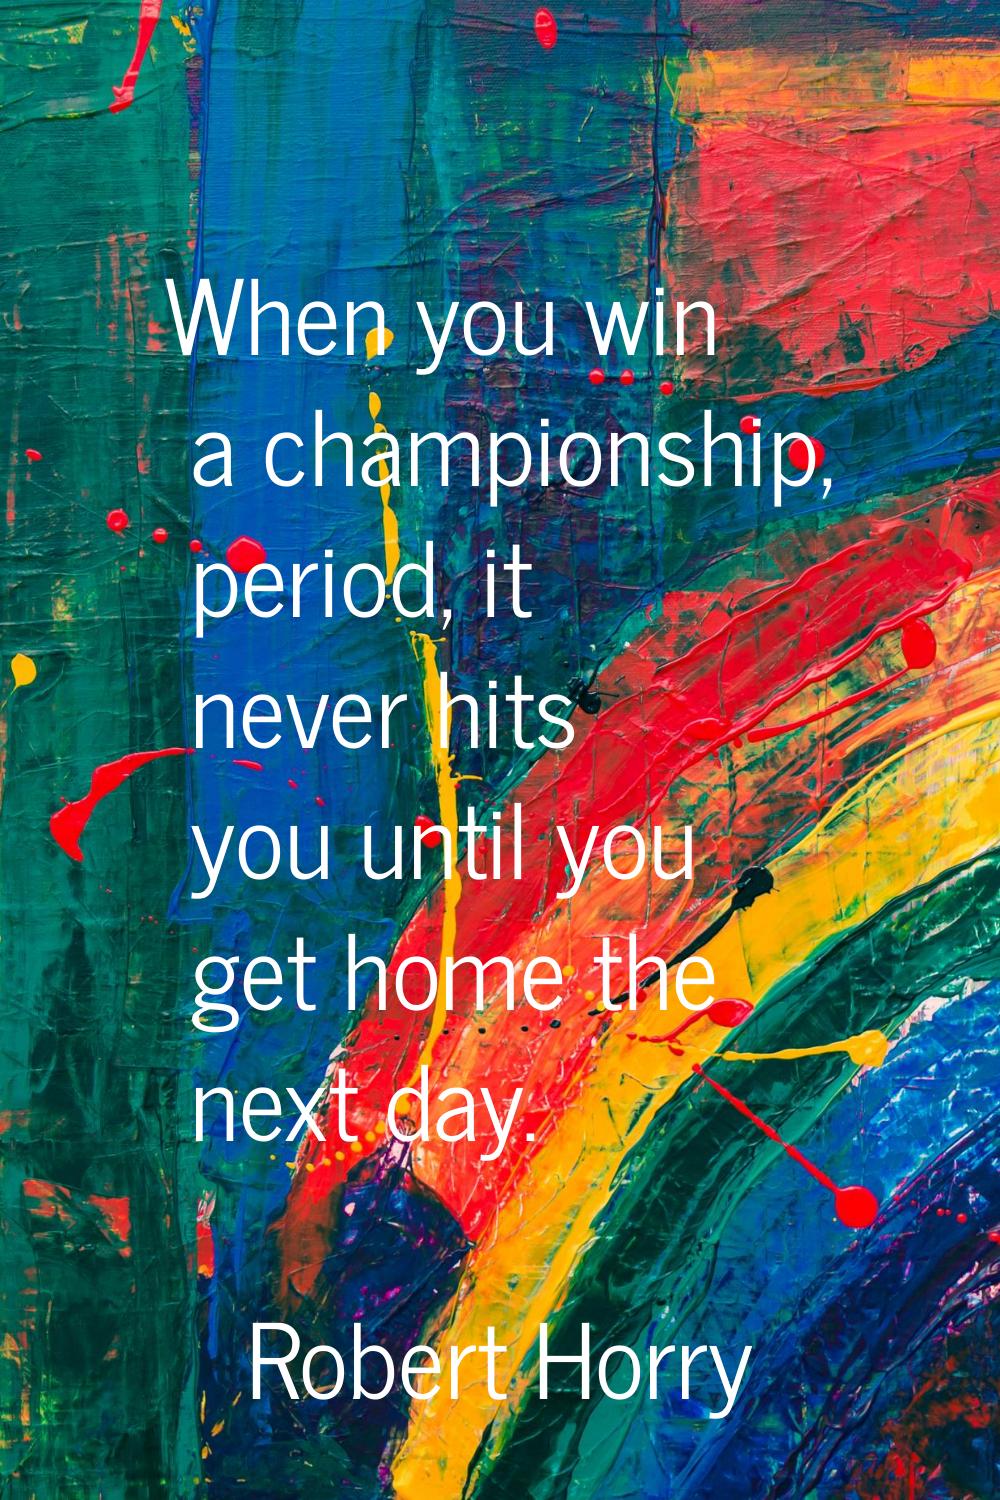 When you win a championship, period, it never hits you until you get home the next day.